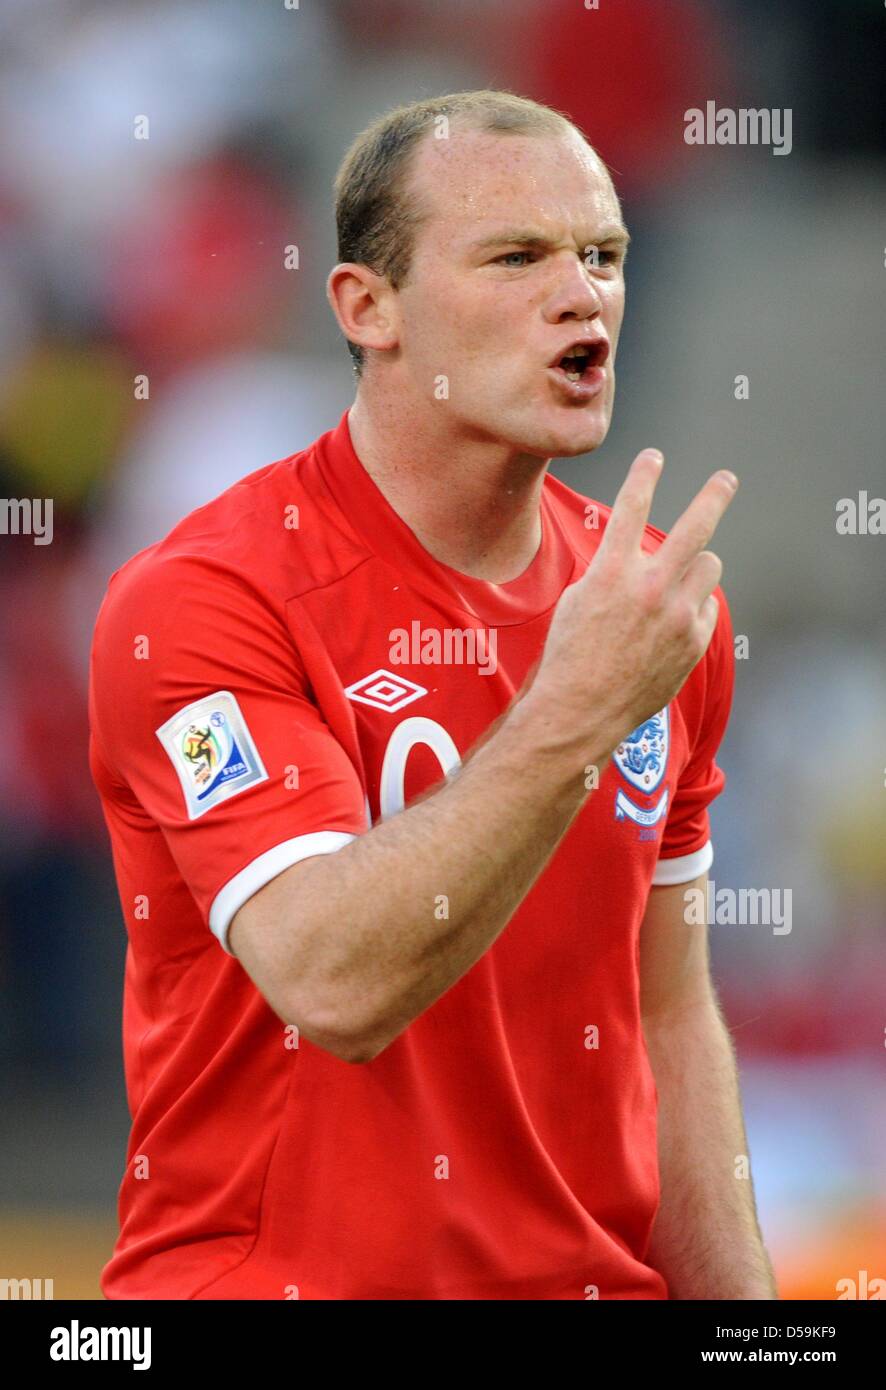 England's Wayne Rooney gestures during the 2010 FIFA World Cup Round of Sixteen match between Germany and England at the Free State Stadium in Bloemfontein, South Africa 27 June 2010. Photo: Marcus Brandt dpa - Please refer to http://dpaq.de/FIFA-WM2010-TC  +++(c) dpa - Bildfunk+++ Stock Photo